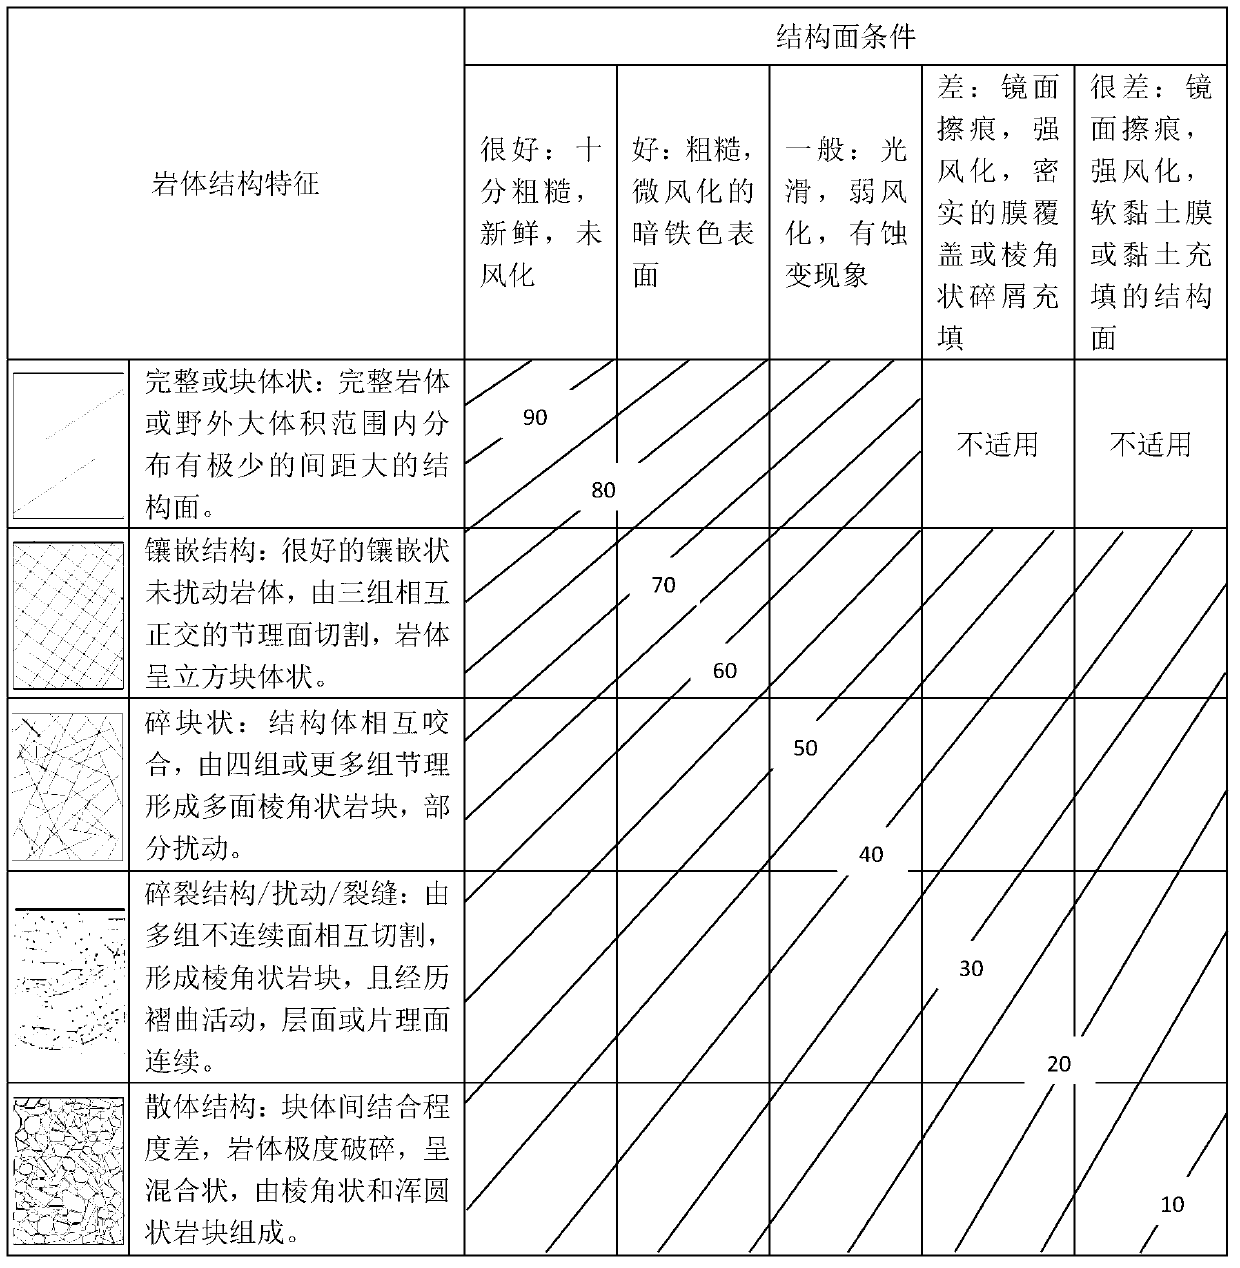 Fuzzy comprehensive evaluation method of geological strength index